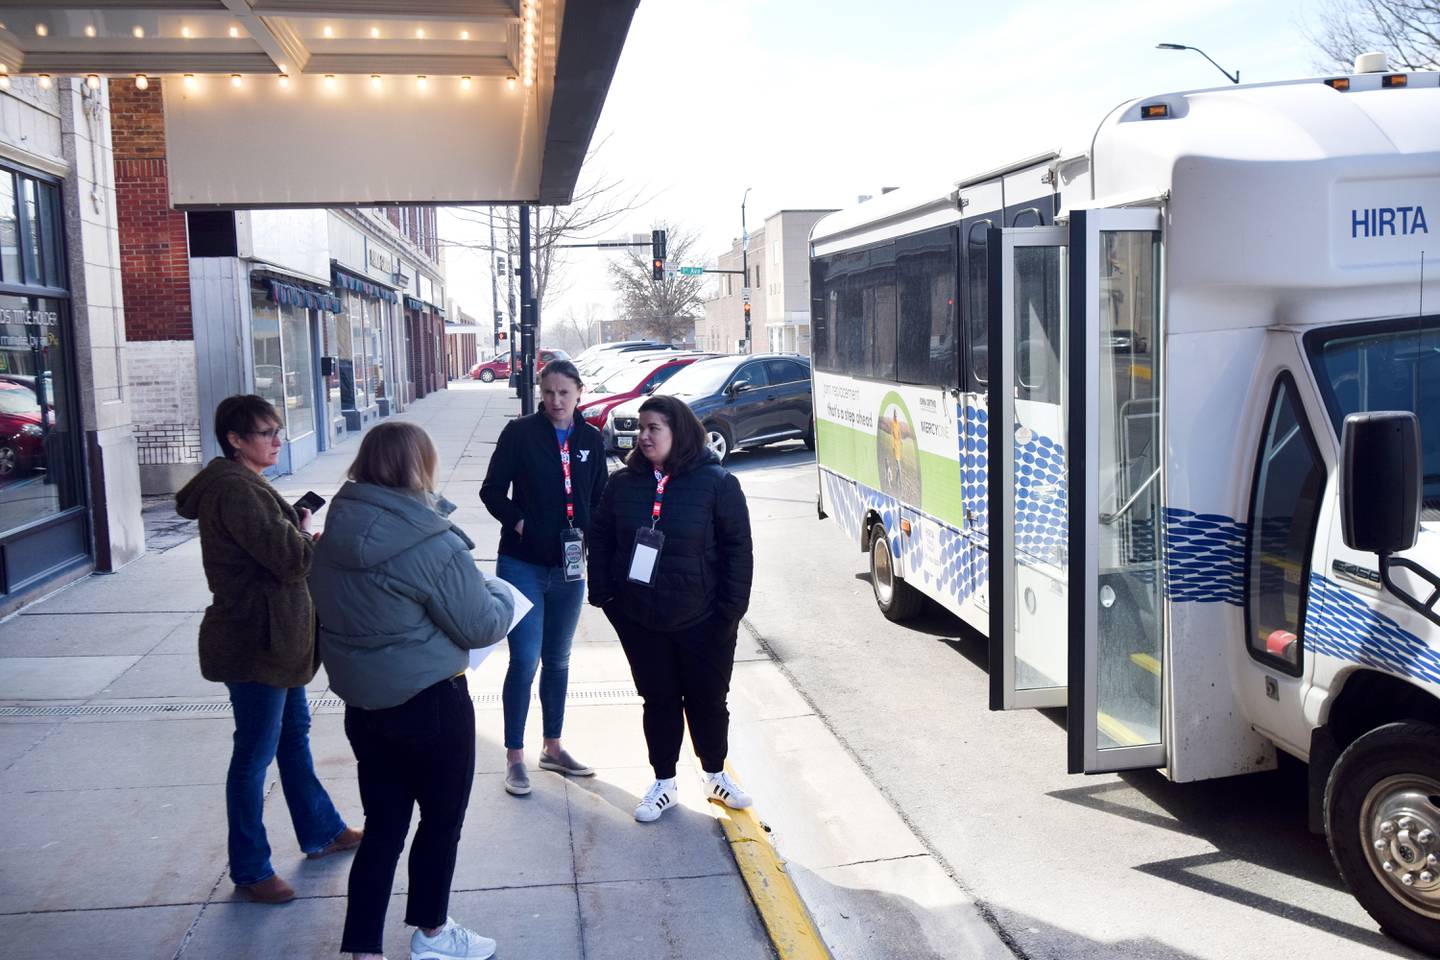 Crew members of Tour Newton gather outside the Capitol II Theatre on March 24 before hopping aboard the HIRTA bus. The tour lasted about one hour and showed visitors a number of different recreational areas, businesses and attractions in Newton.